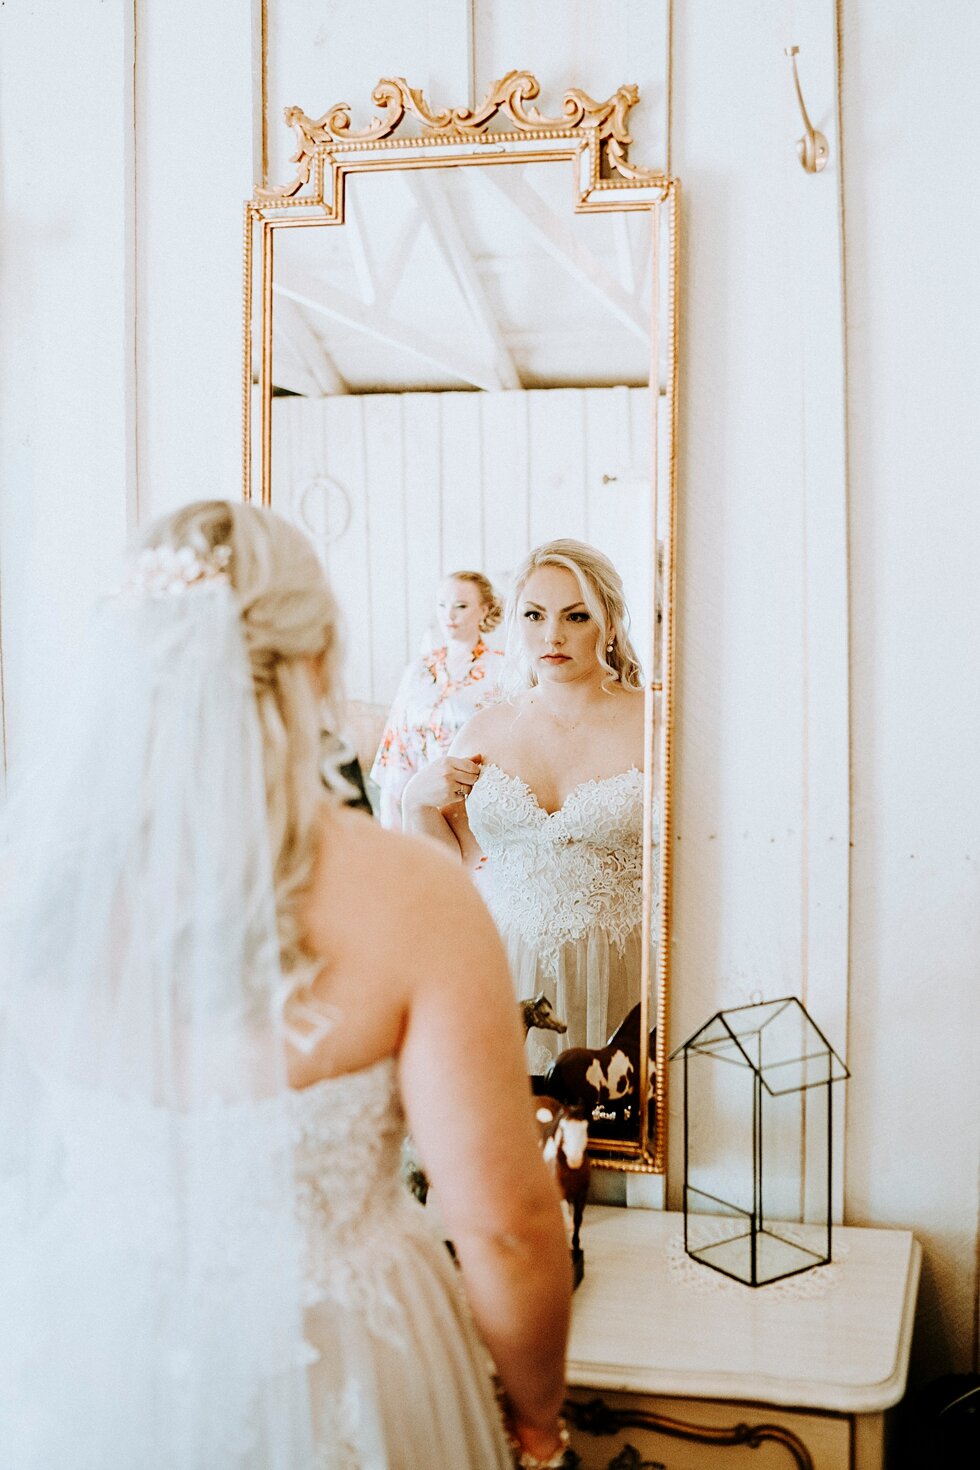  Beautiful bride putting on the final touchese before she becomes a married woman. western wedding midway kentucky vintage barn gold mirror lace wedding gown sweetheart neckline #vintagebarn #westernwedding #midwayky #vintagewedding #horses #thatsdar